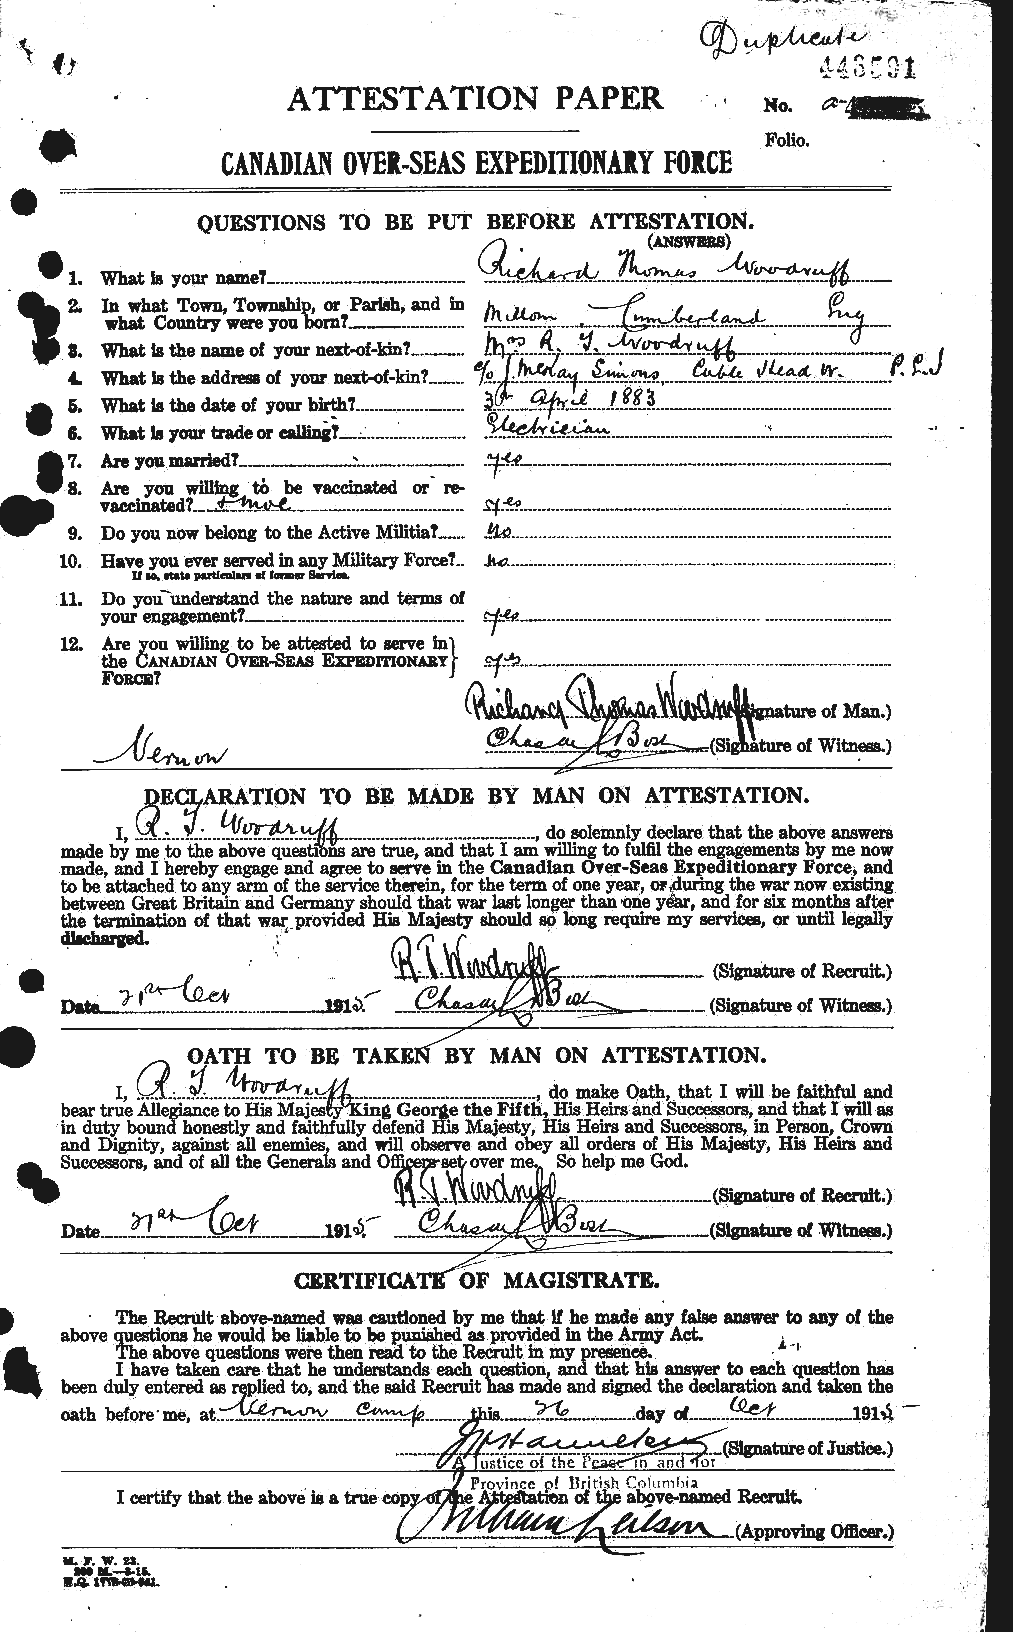 Personnel Records of the First World War - CEF 687652a